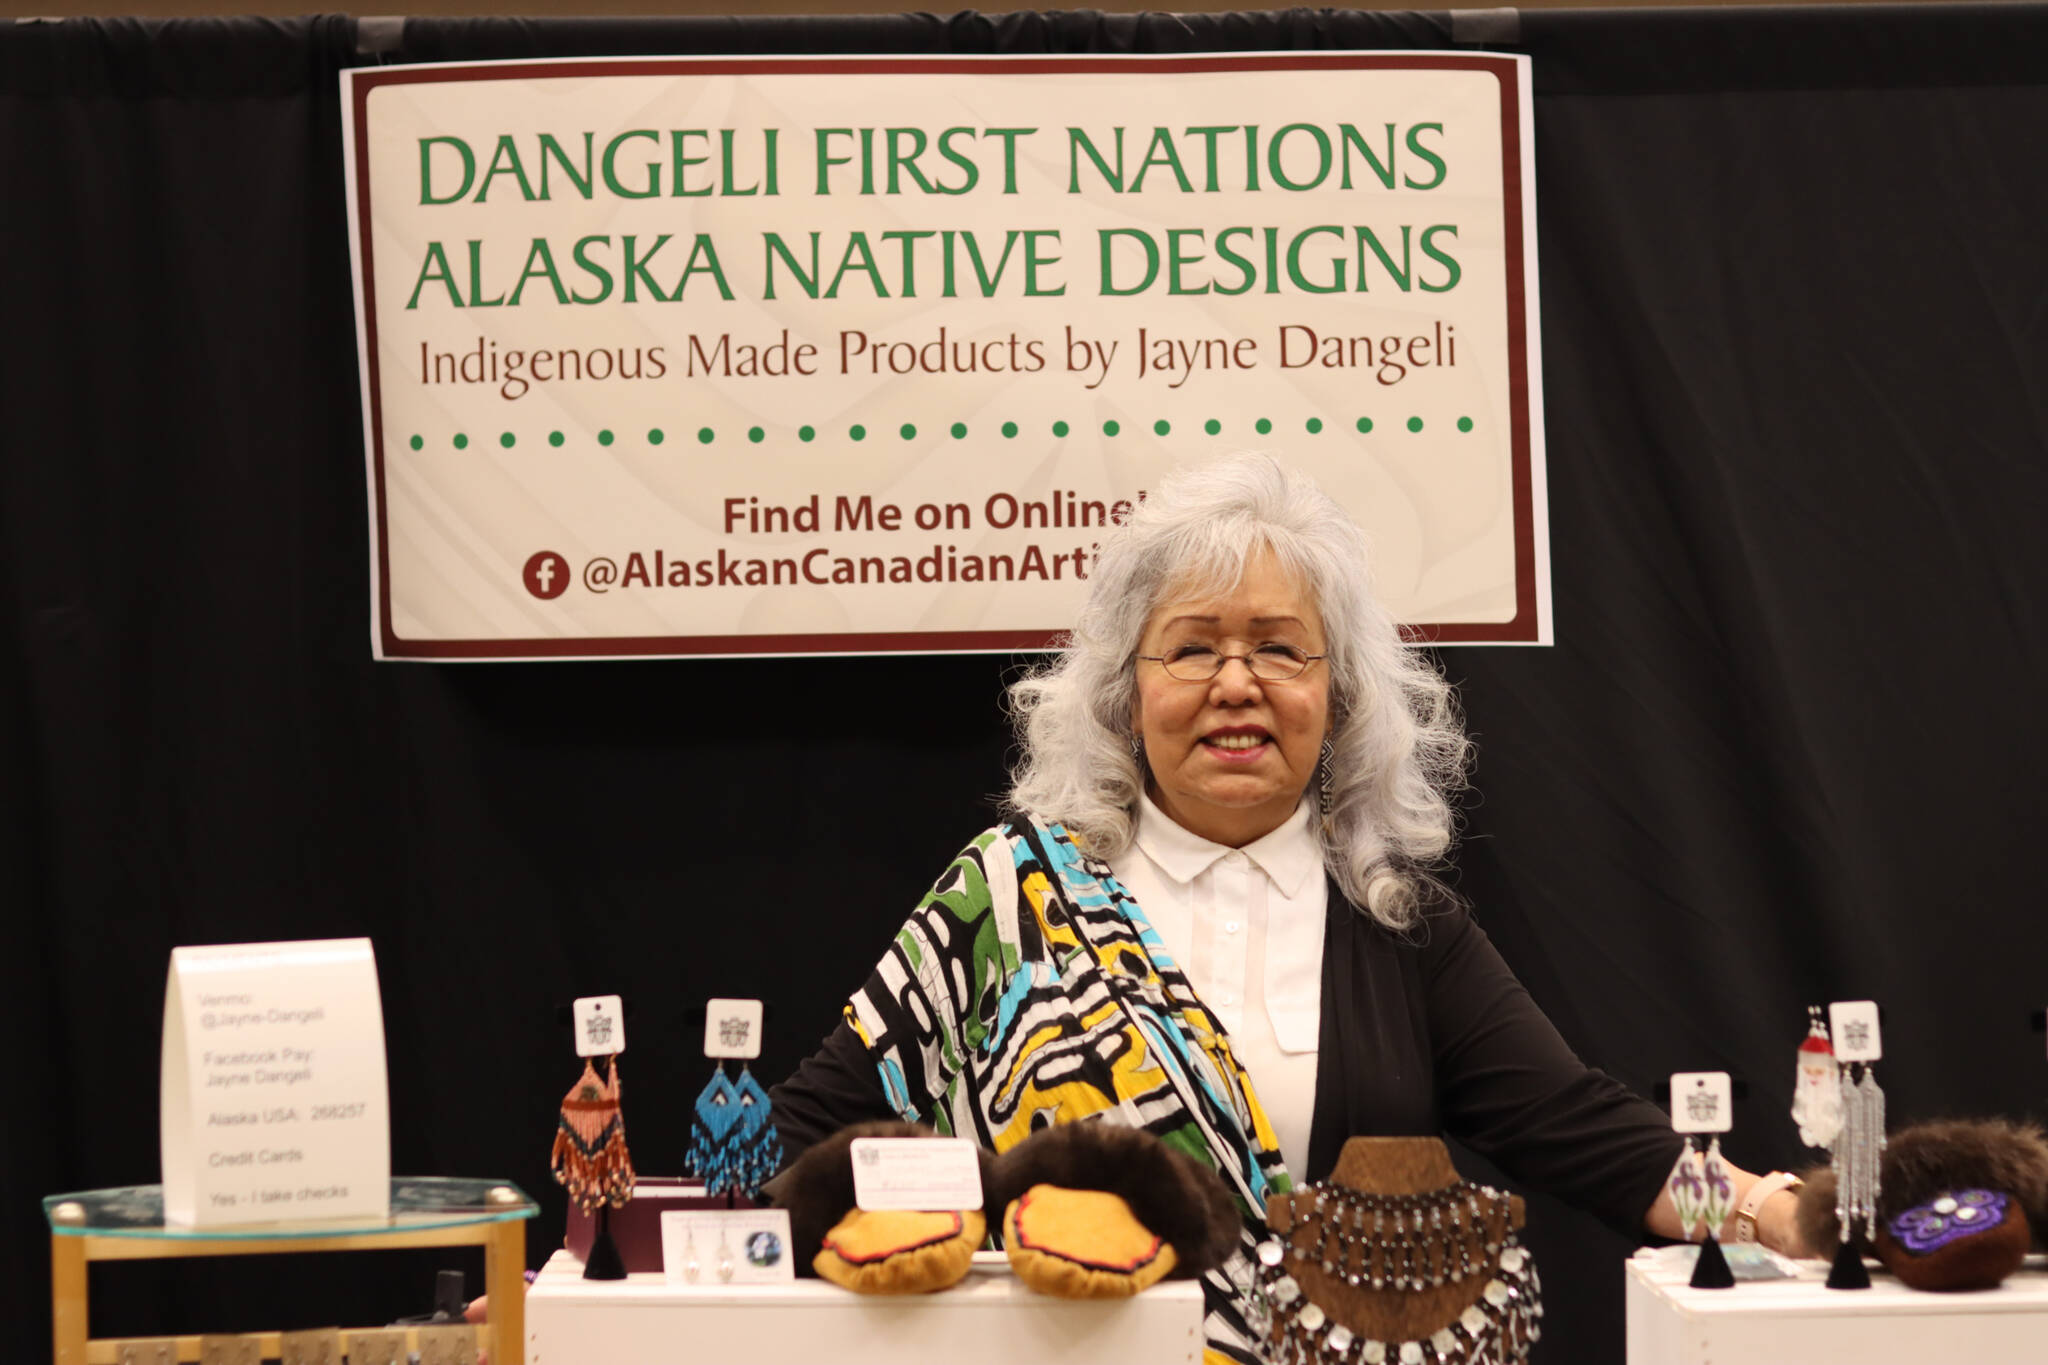 Local artists and 40-year Juneau resident Jayne Dangeli features her handmade Indigenous products through her store, Dangeli First Nations Alaska Native Designs at the Indigenous Artists & Vendors Holiday Market on Friday. (Jonson Kuhn / Juneau Empire)